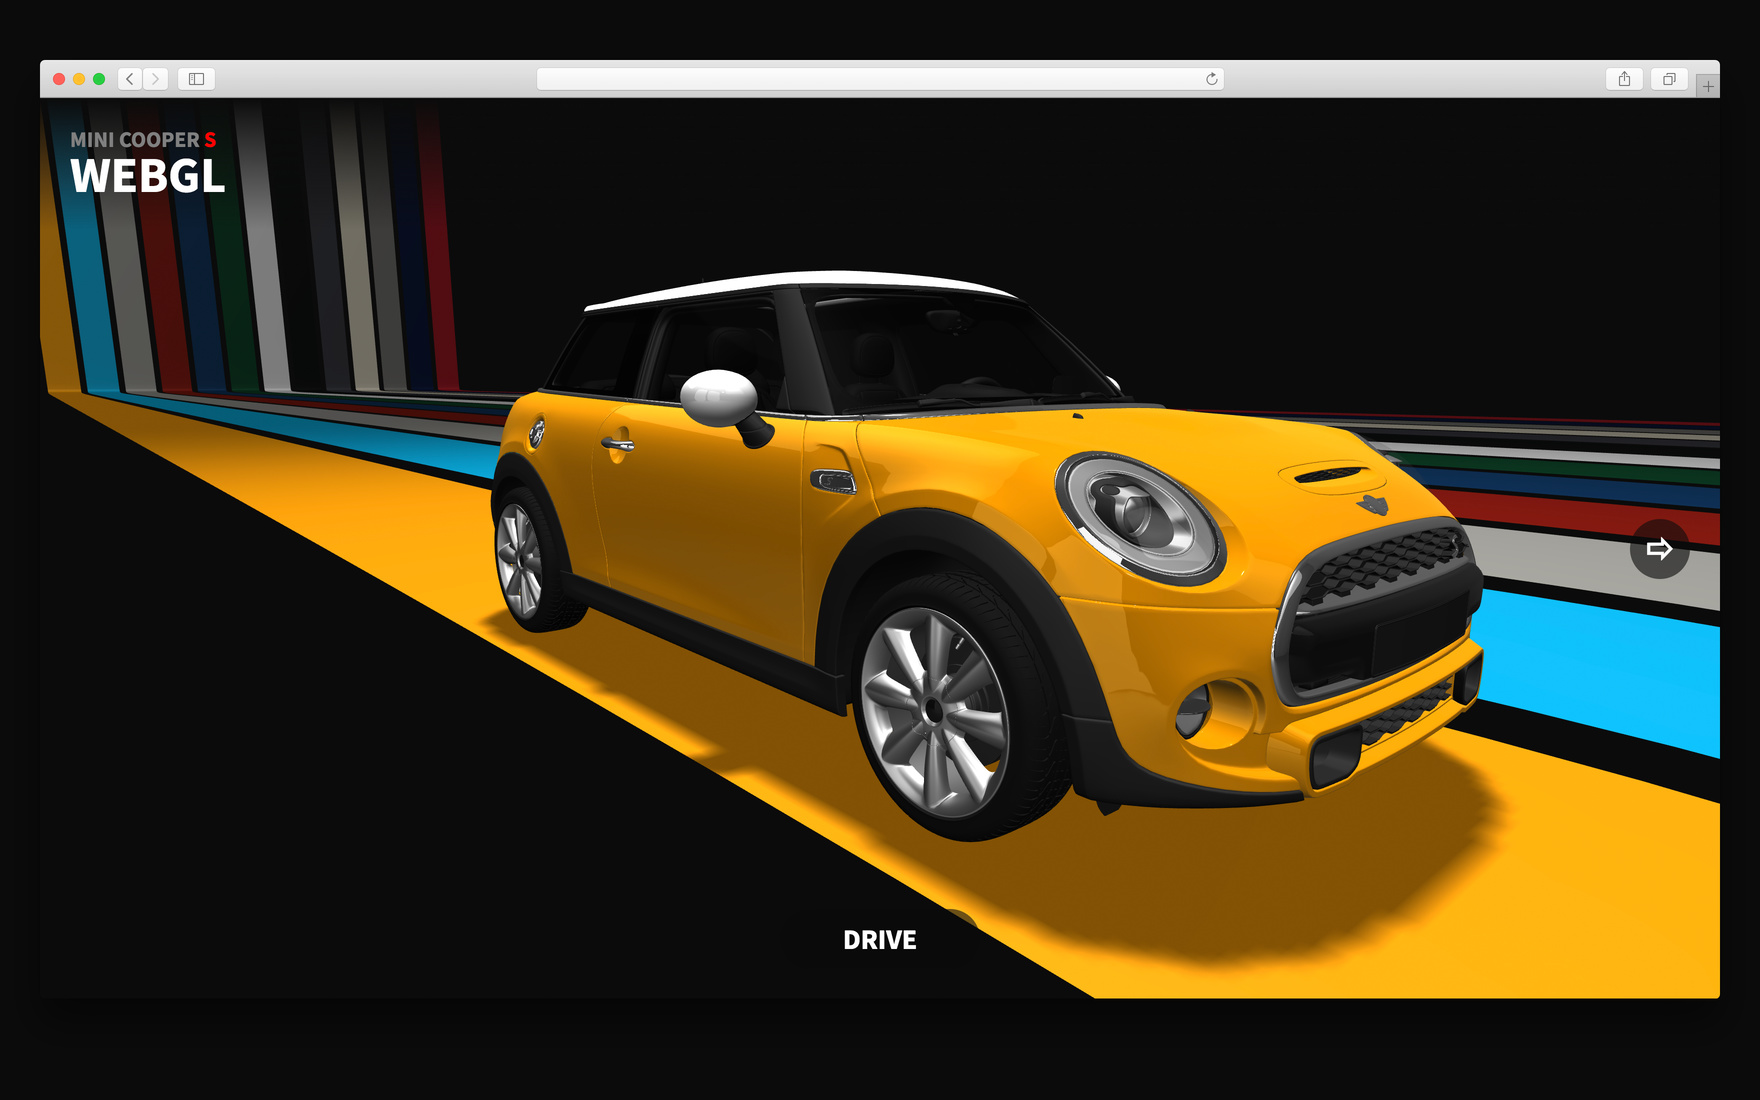 MINI in yellow paint, seen from the side